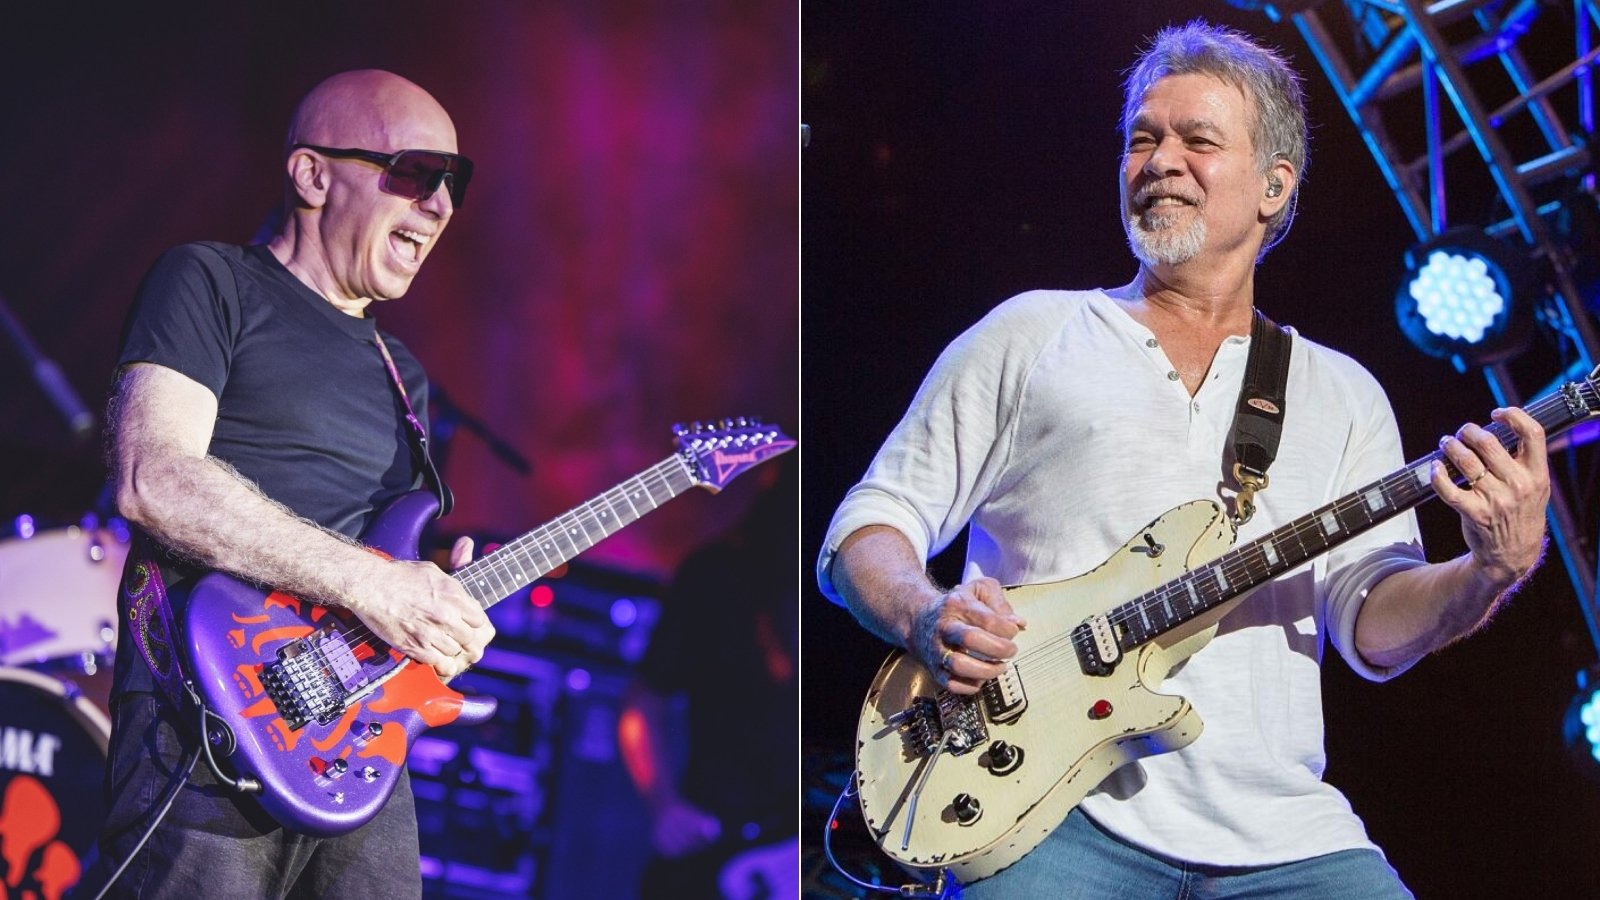 Joe Satriani Reveals Unusual Thing He Did to Prepare for Playing Eddie Van Halen's Parts: 'I Couldn't Find One Live Clip of Eddie Playing the Same Song Remotely Similarly'